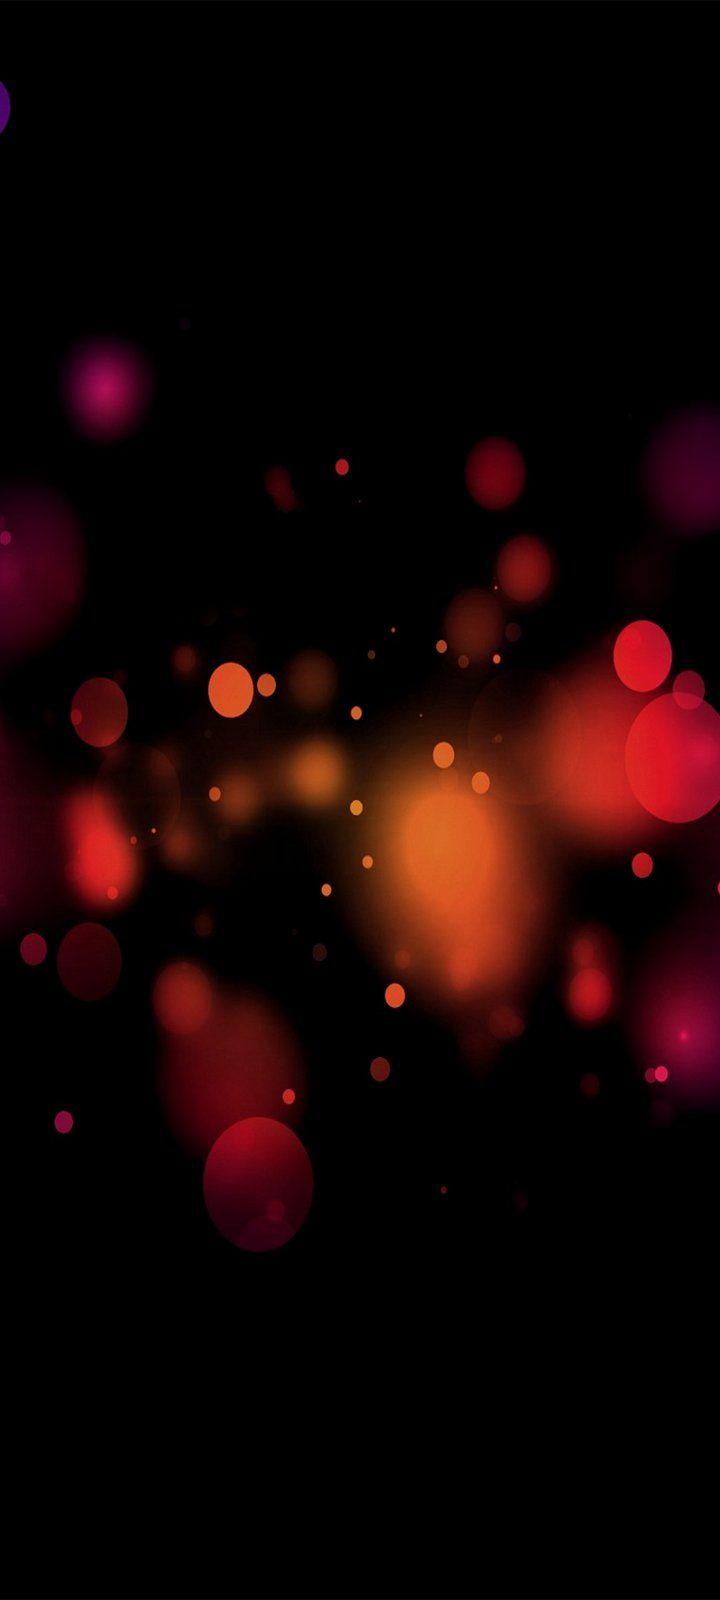 720x1600 Wallpaper Hd For Phone  S446  Chillout Wallpapers